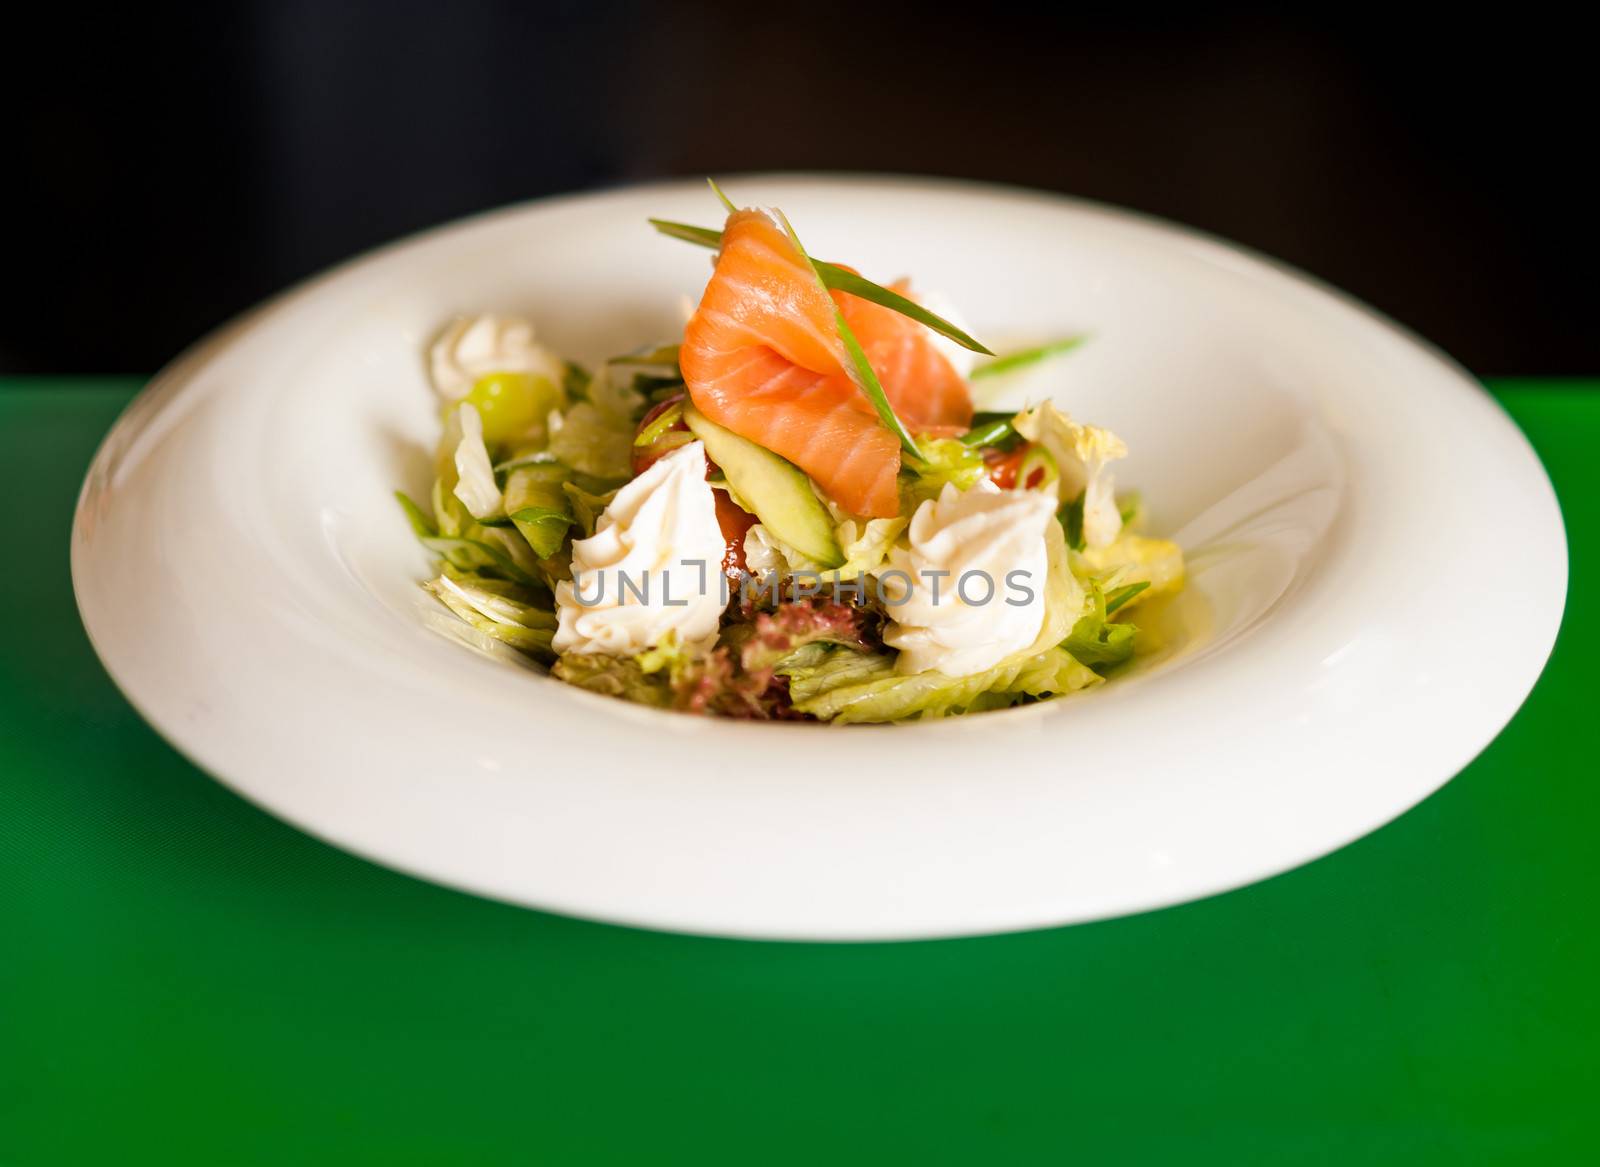 Smoked salmon with cream and salad by stockyimages